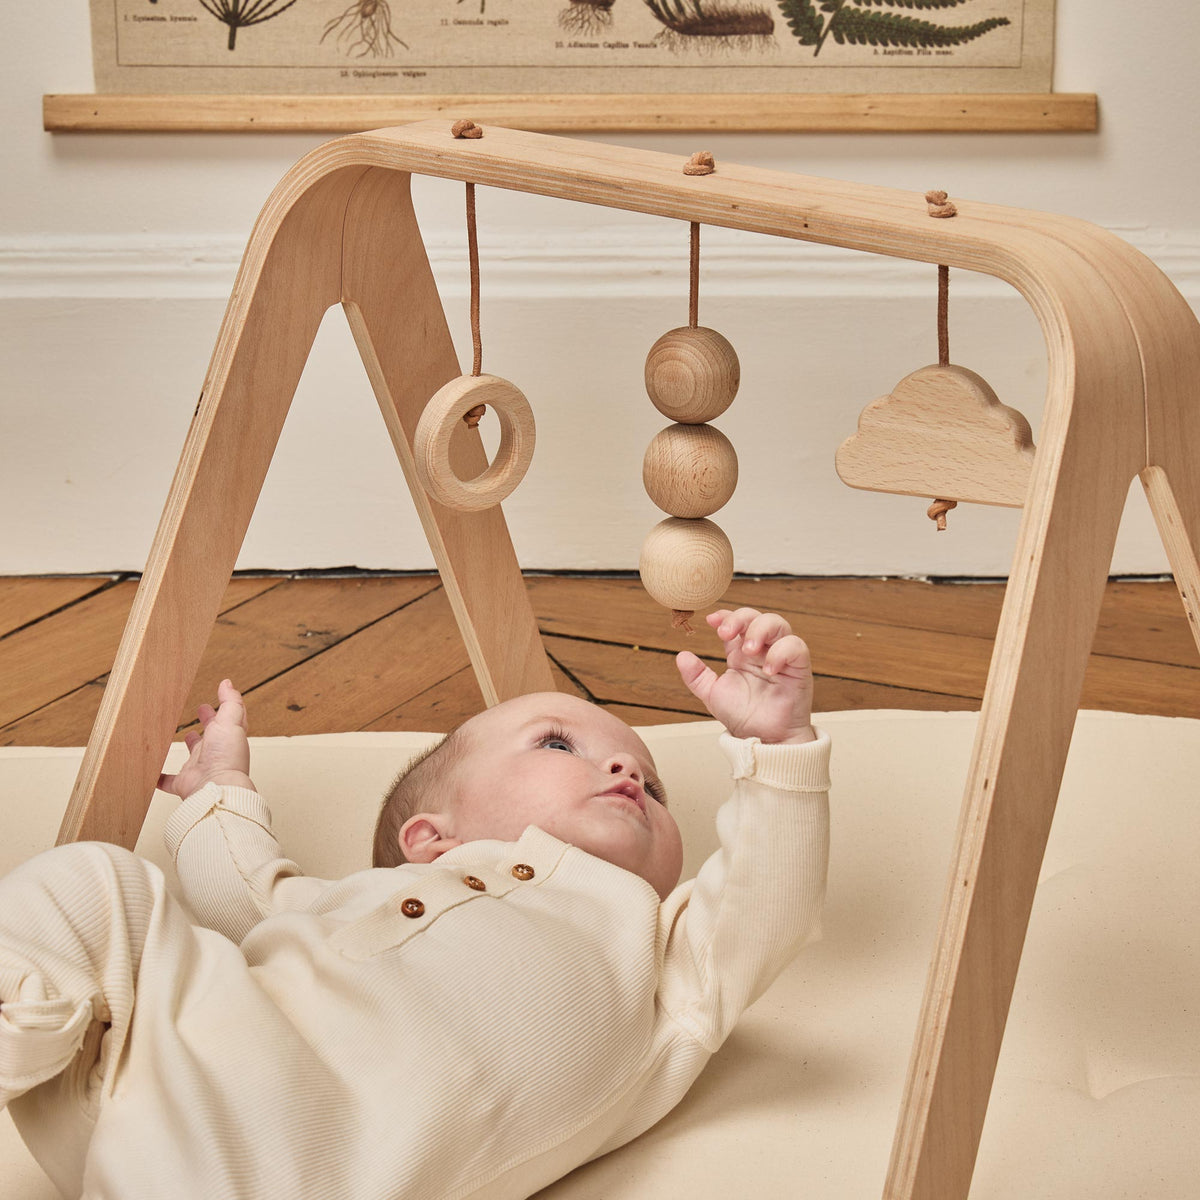 NAHO Activity Arch & Wooden Toys by Charlie Crane - Maude Kids Decor